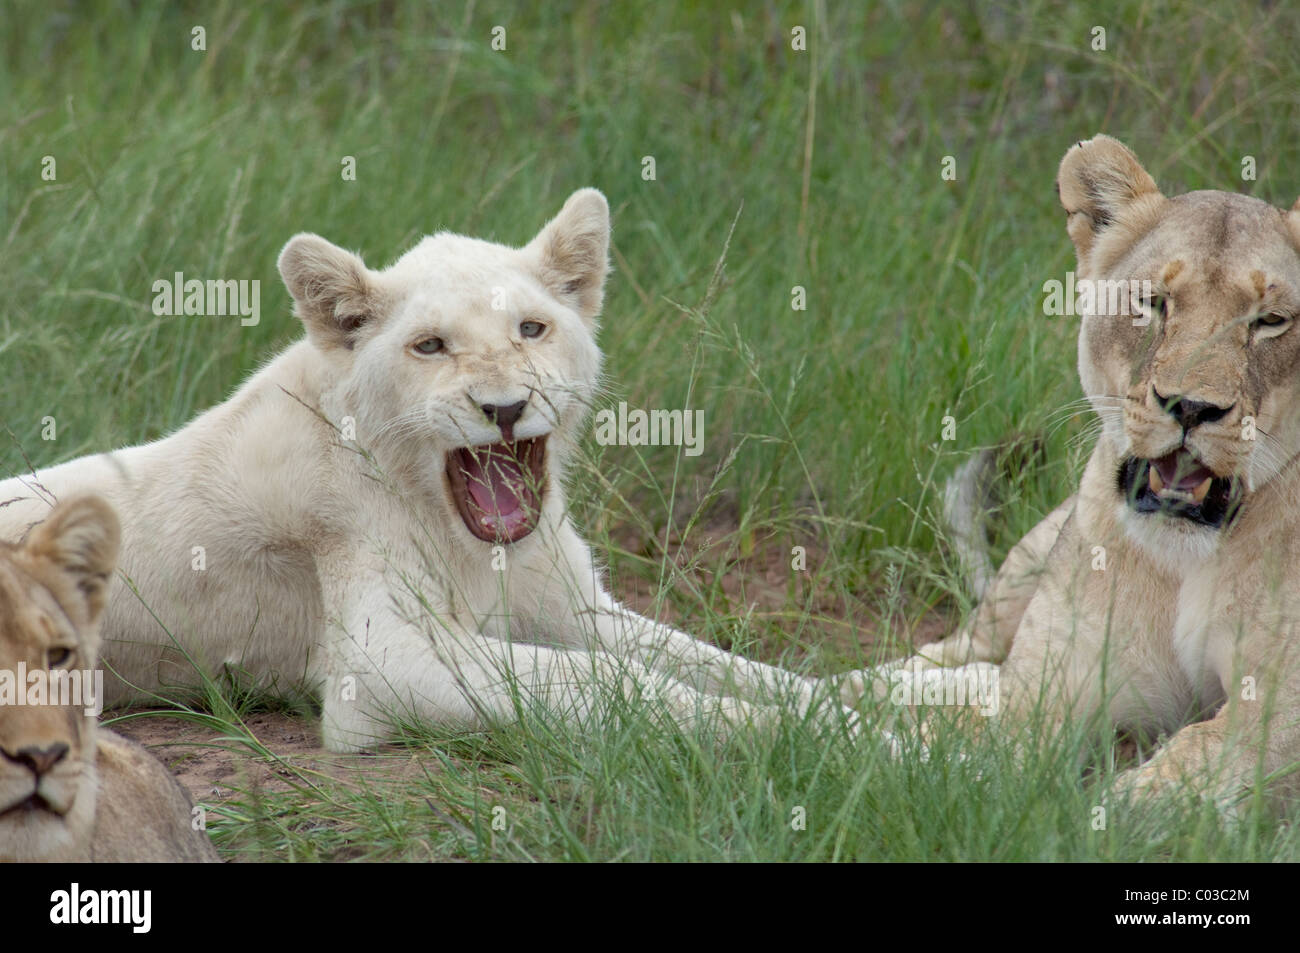 South Africa, East London, Inkwenkwezi Private Game Reserve. African lions (Wild: Panthera leo) unique white lion cub. Stock Photo